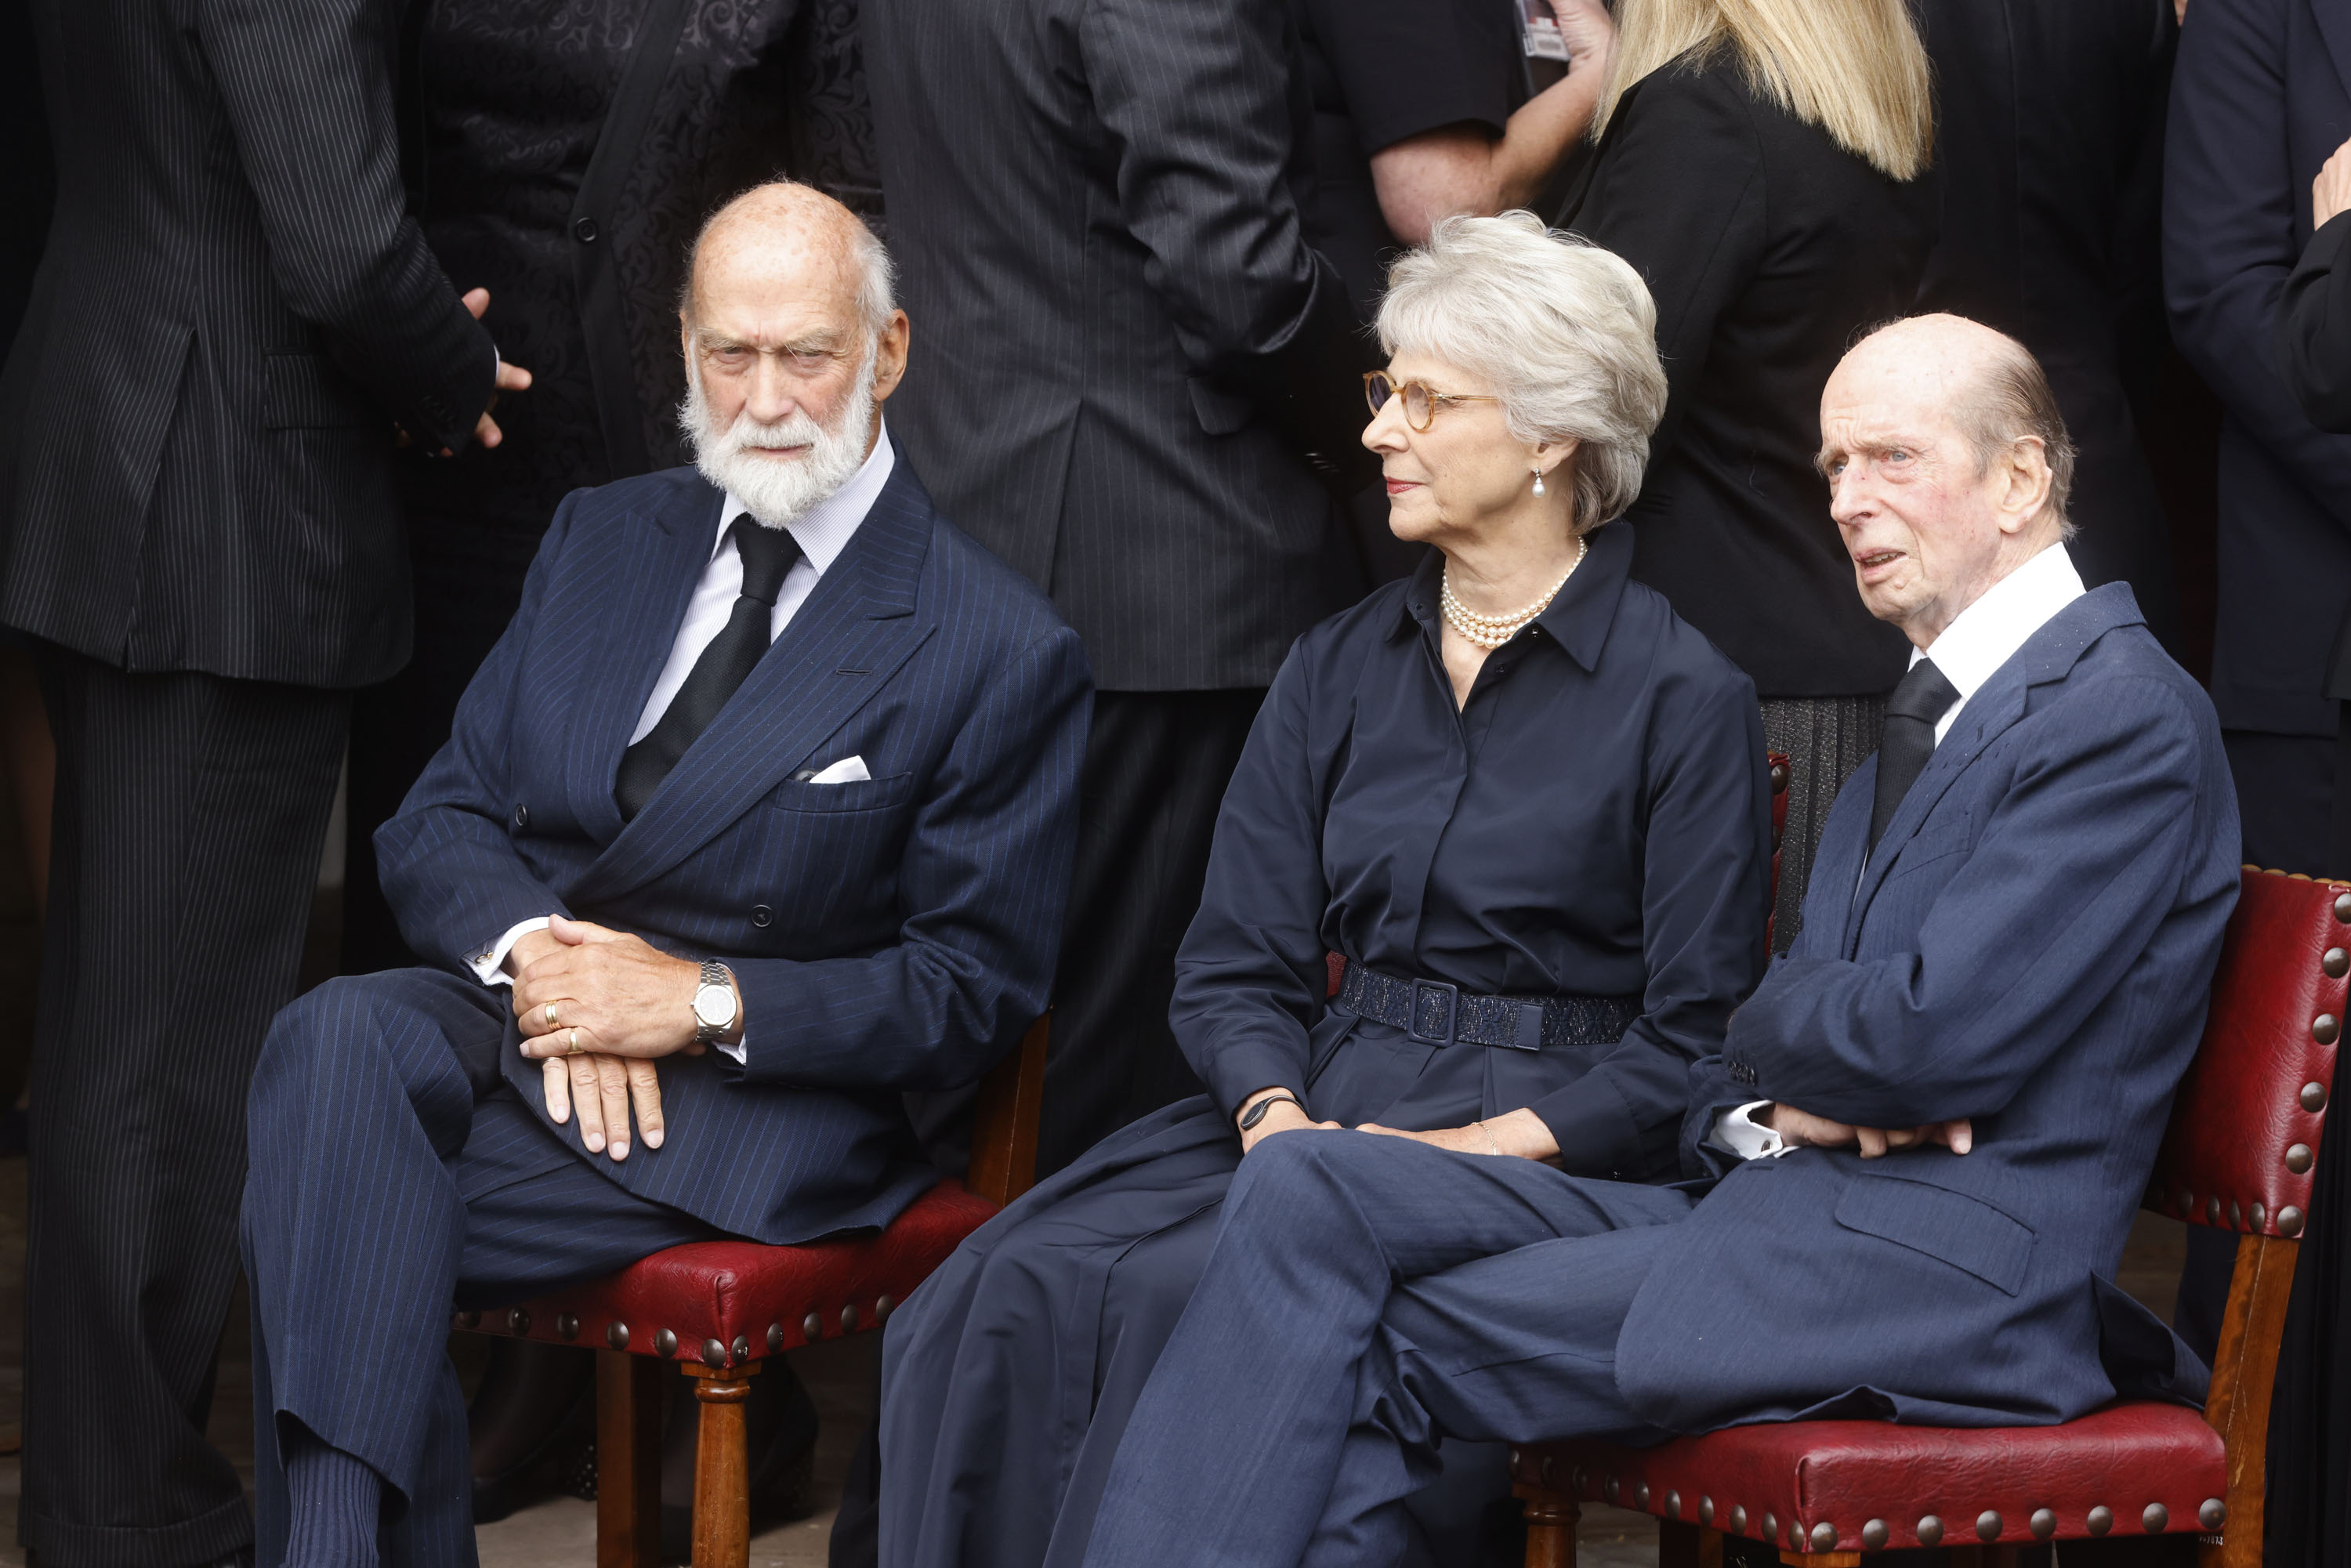 <p>Royals from another era who belong to the late queen's generation -- her first cousin Prince Michael of Kent; another first cousin's wife, Birgitte, Duchess of Gloucester; and her first cousin Prince Edward, Duke of Kent -- sat together as the Principal Proclamation was read from the balcony overlooking Friary Court at St. James's Palace in London on Sept. 10, 2022, as King Charles III was proclaimed monarch in a meeting of the Accession Council. The Accession Council, attended by Privy Councillors, is divided into two parts: In part I, the Privy Council, without the king present, proclaims him sovereign; and part II, in which the king holds the first meeting of His Majesty's Privy Council. The Accession Council was followed by the first public reading of the Principal Proclamation read from the balcony overlooking Friary Court at St James's Palace.</p>